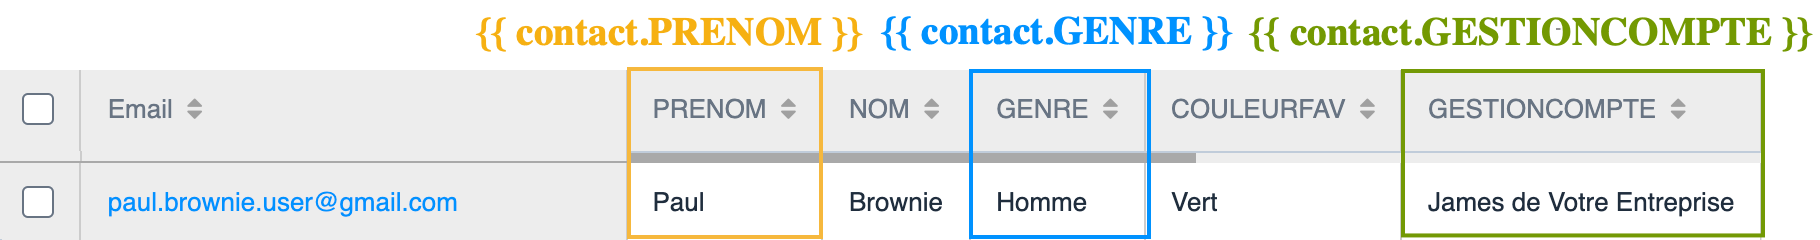 contacts_attributes_FR.png